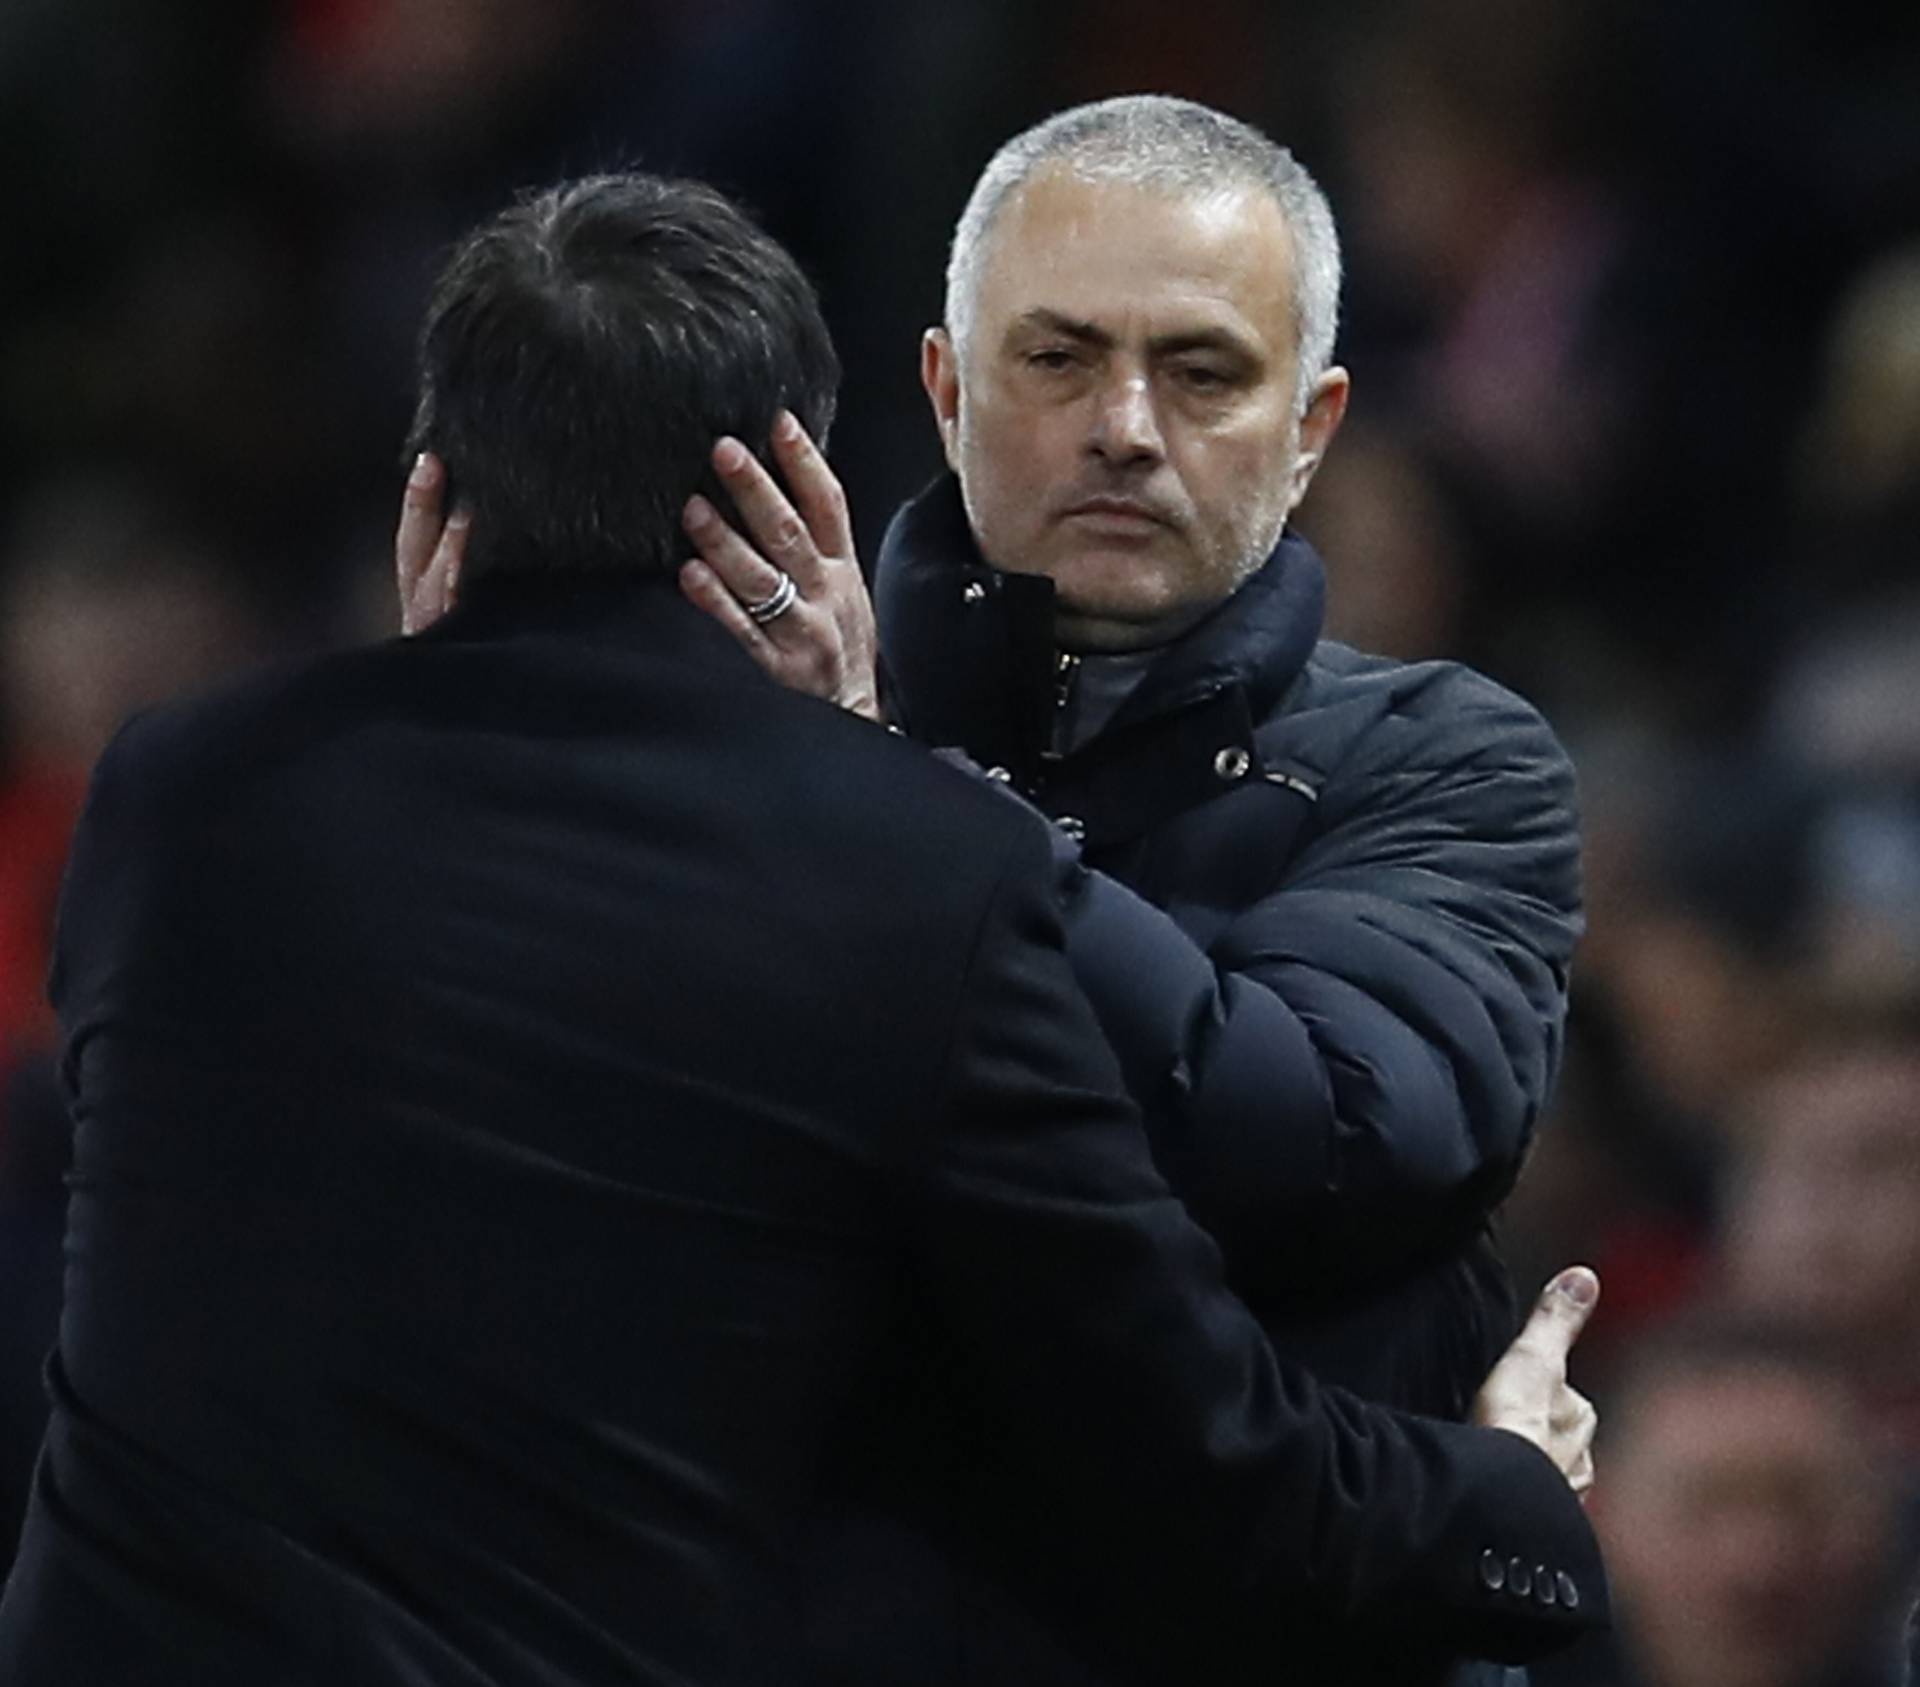 Manchester United manager Jose Mourinho and Hull City manager Marco Silva after the game